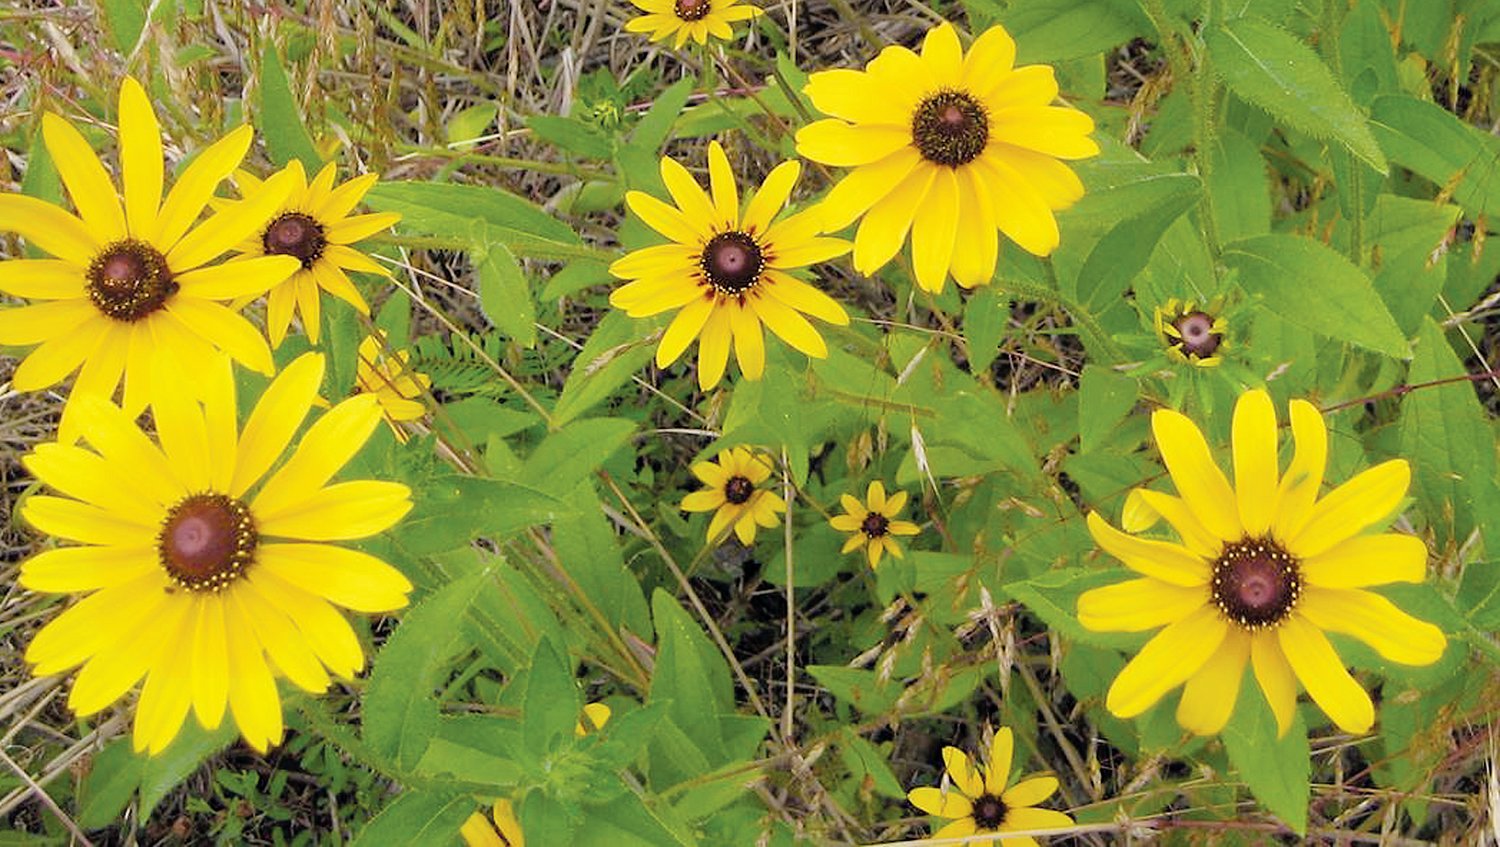 Summer brings black-eyed Susans to the pollinator garden at the Lower Haw River State Natural Area.